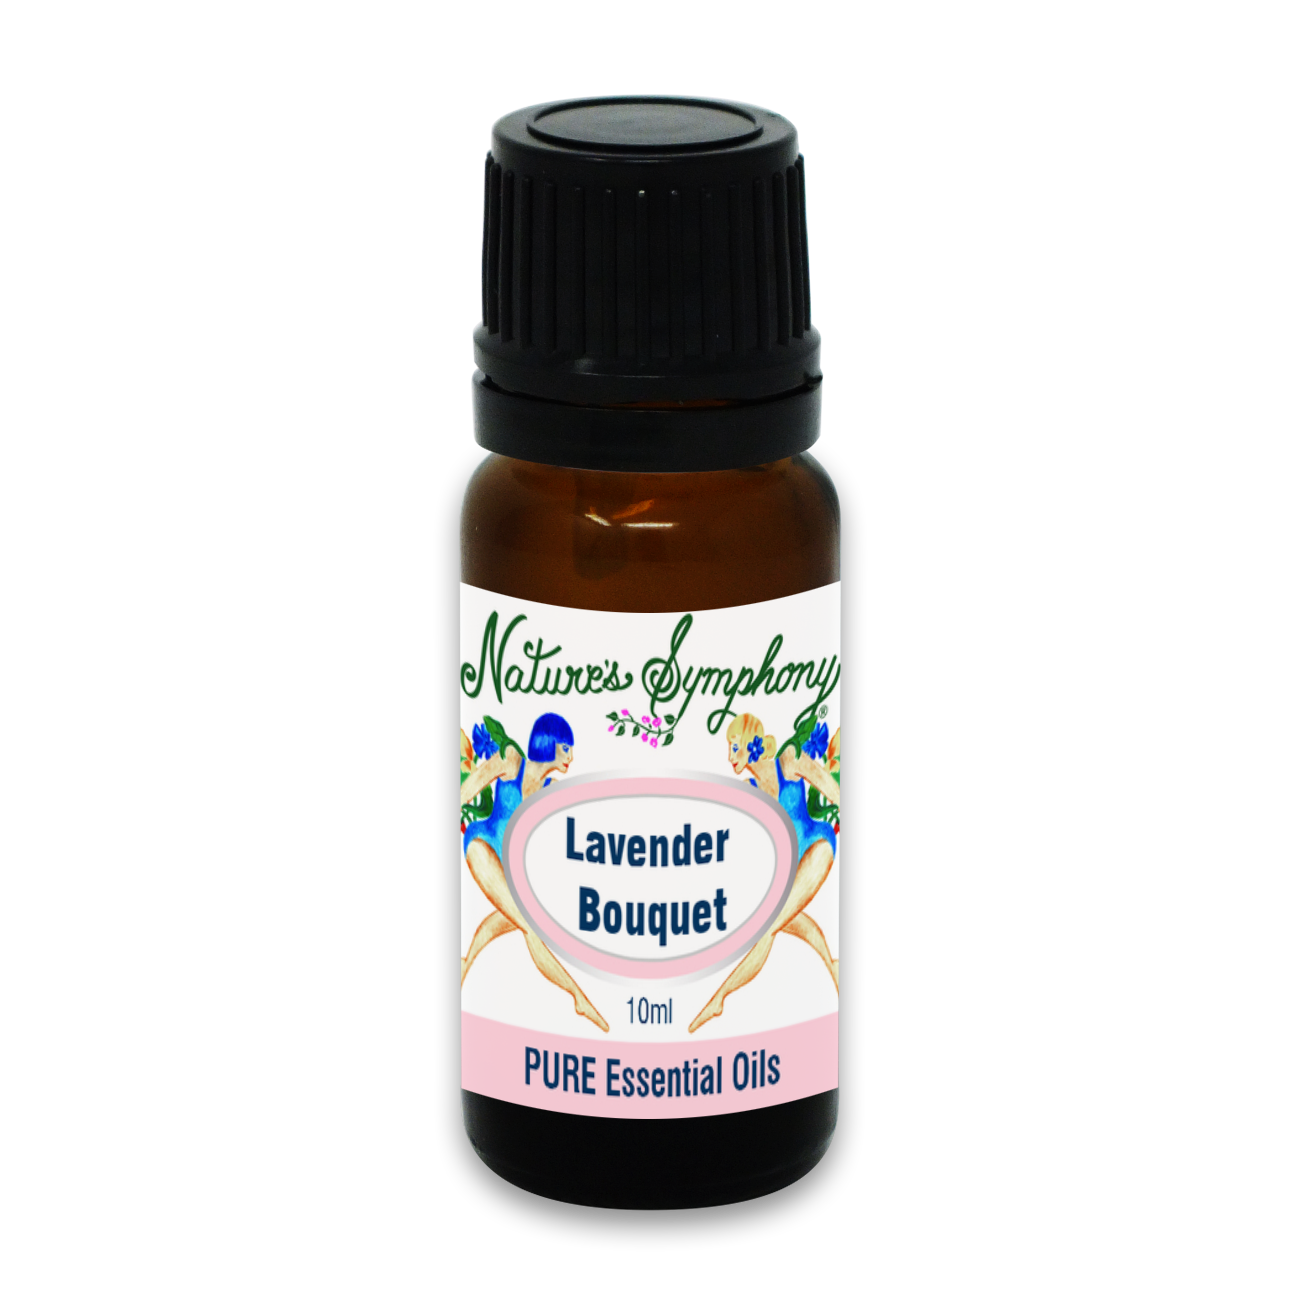 Lavender Blend of lavandin and lavender, Ambiance Diffusion blend - 10ml